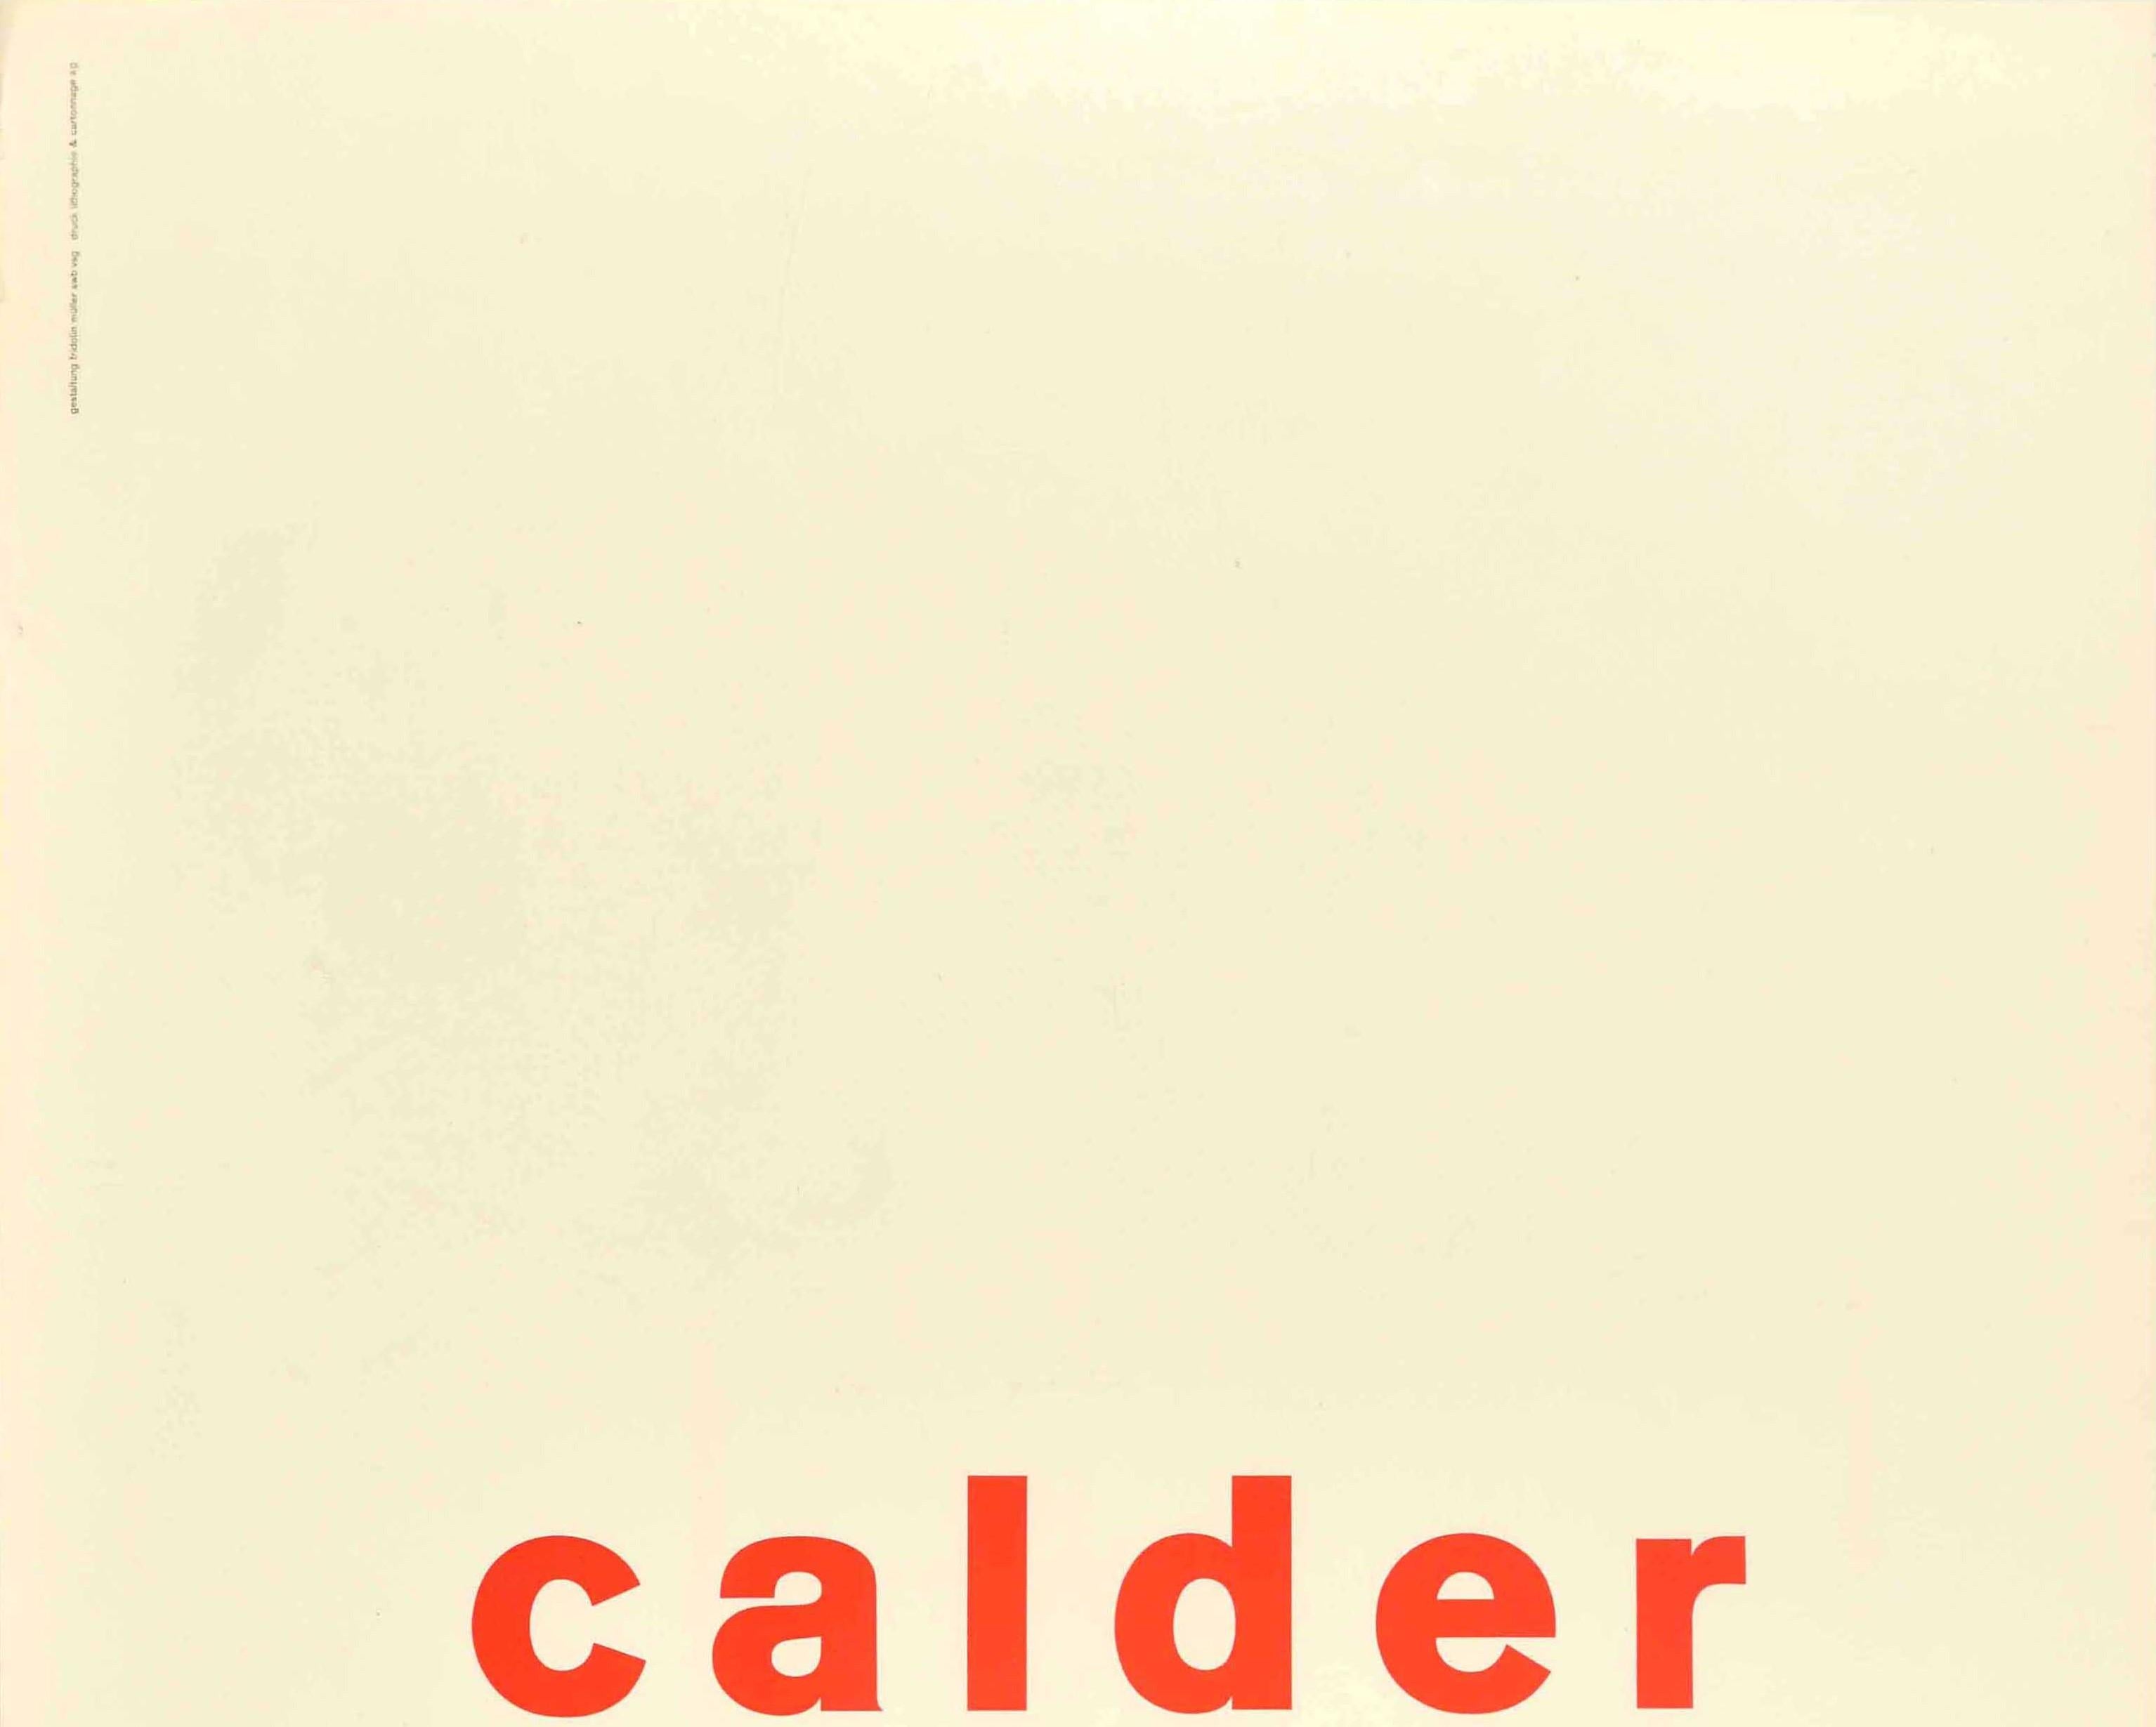 Original vintage poster advertising an art exhibition of kinetic mobile sculptures by the renowned American sculptor Alexander Calder (1898-1976) held at the Museum of Decorative Arts in Zurich from 21 May to 26 June 1960, part of the June Festival